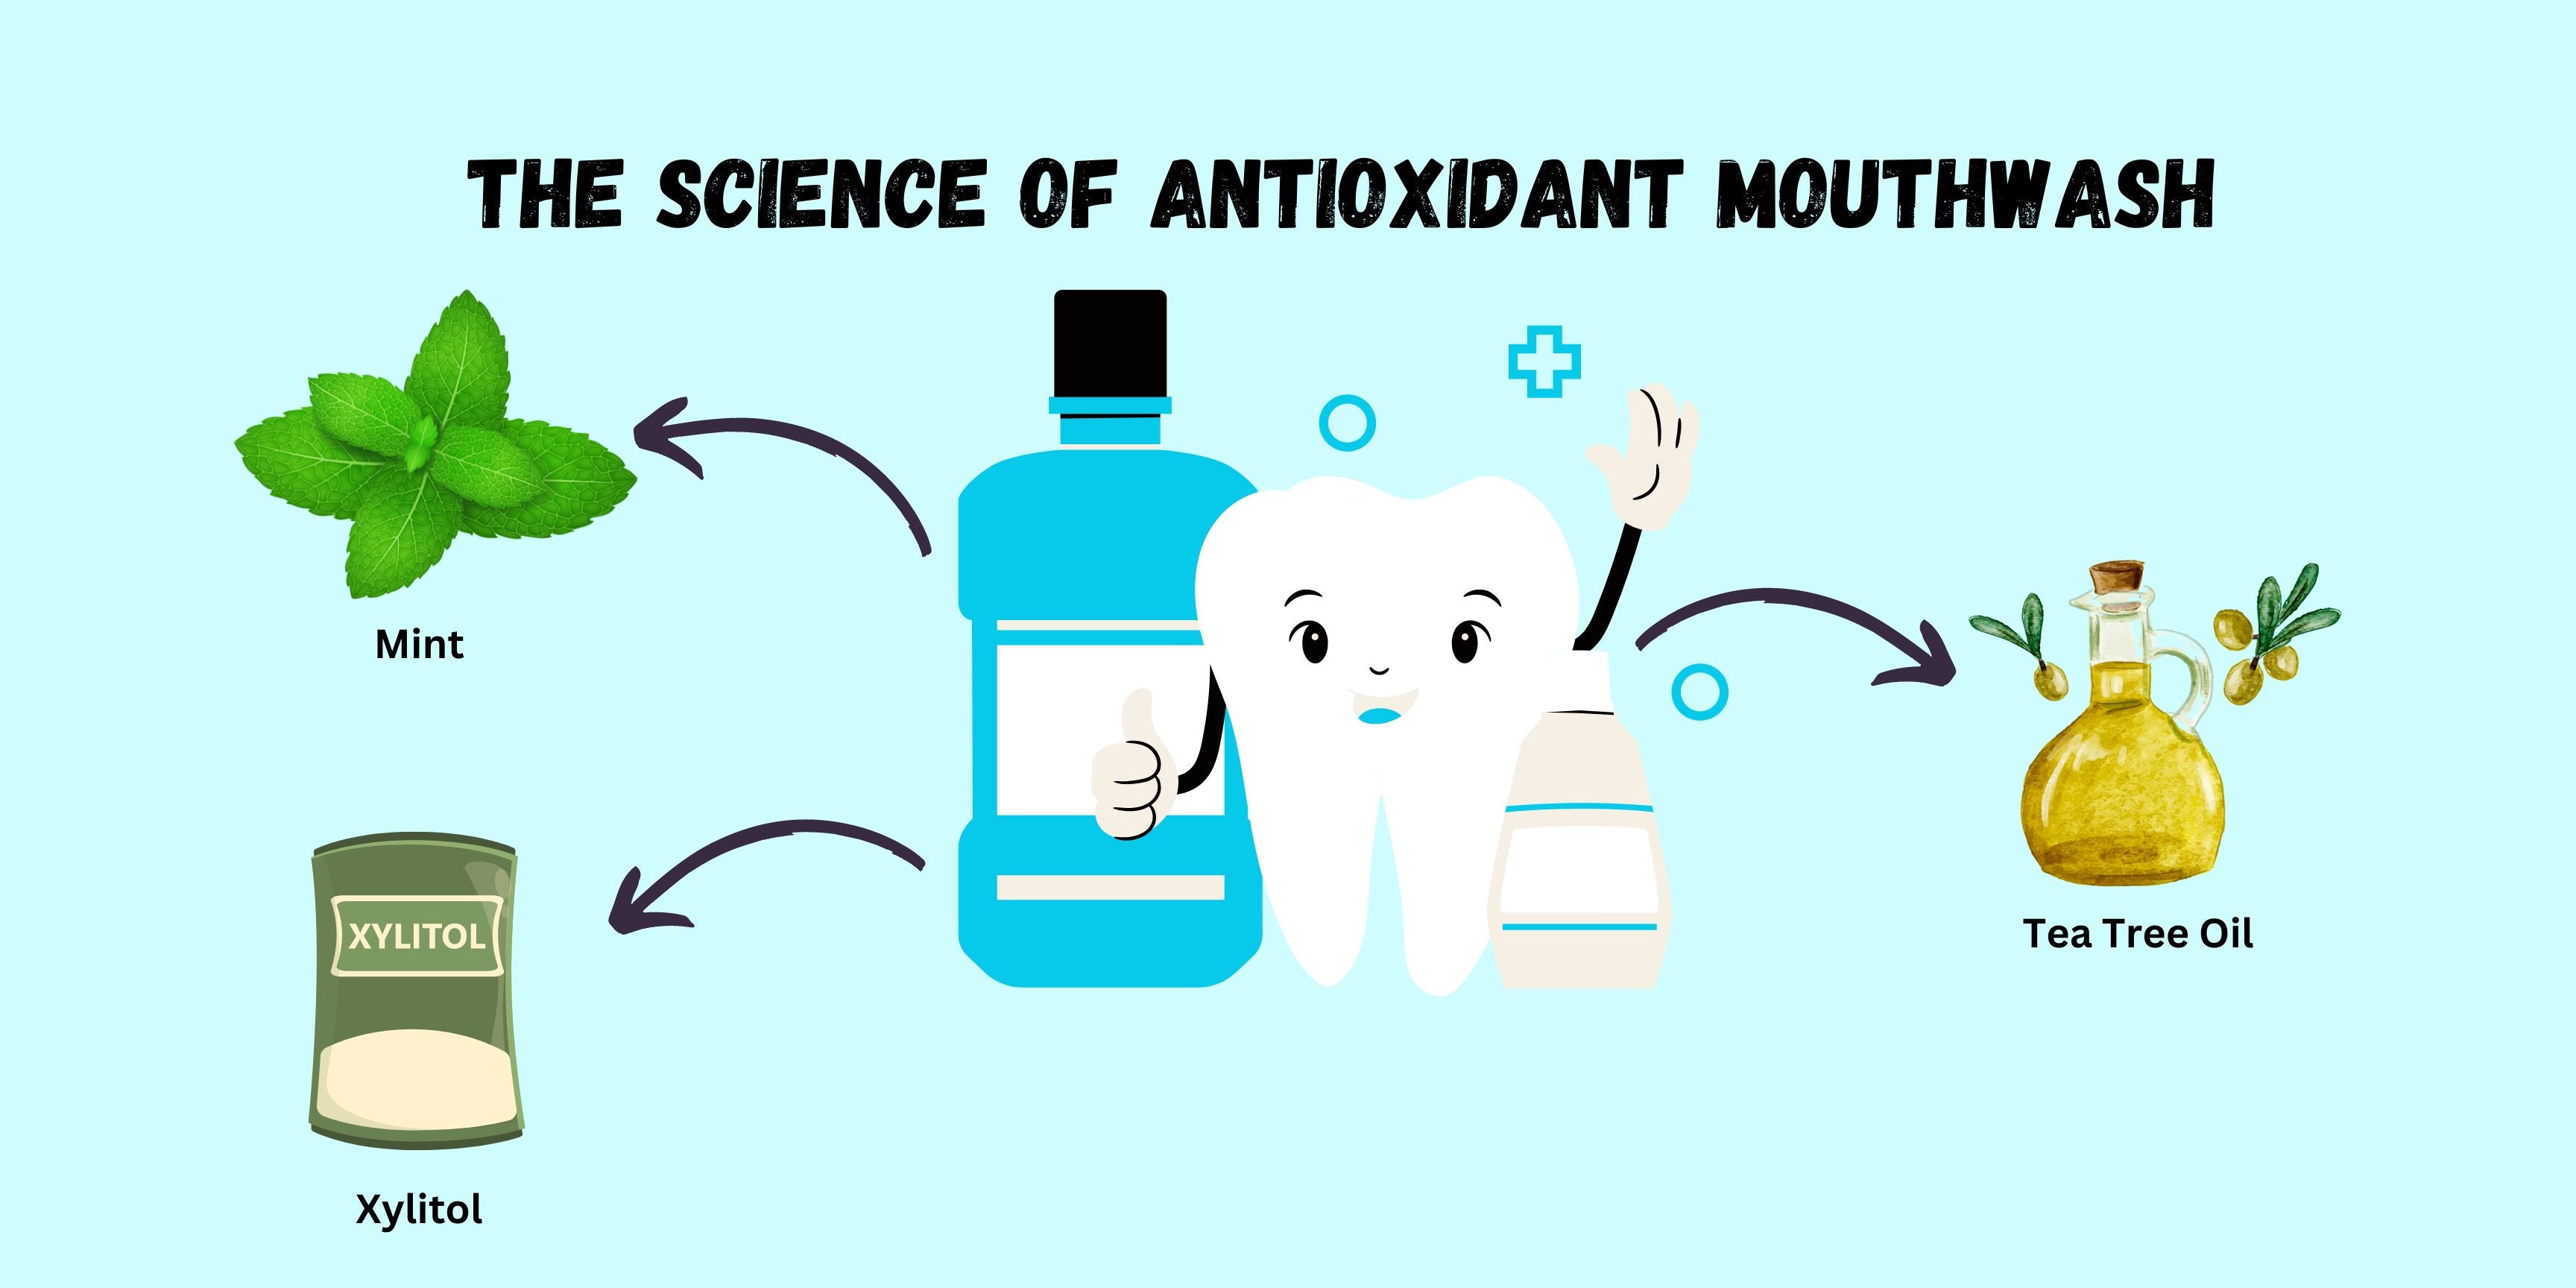 The Science of Antioxidant Mouthwash